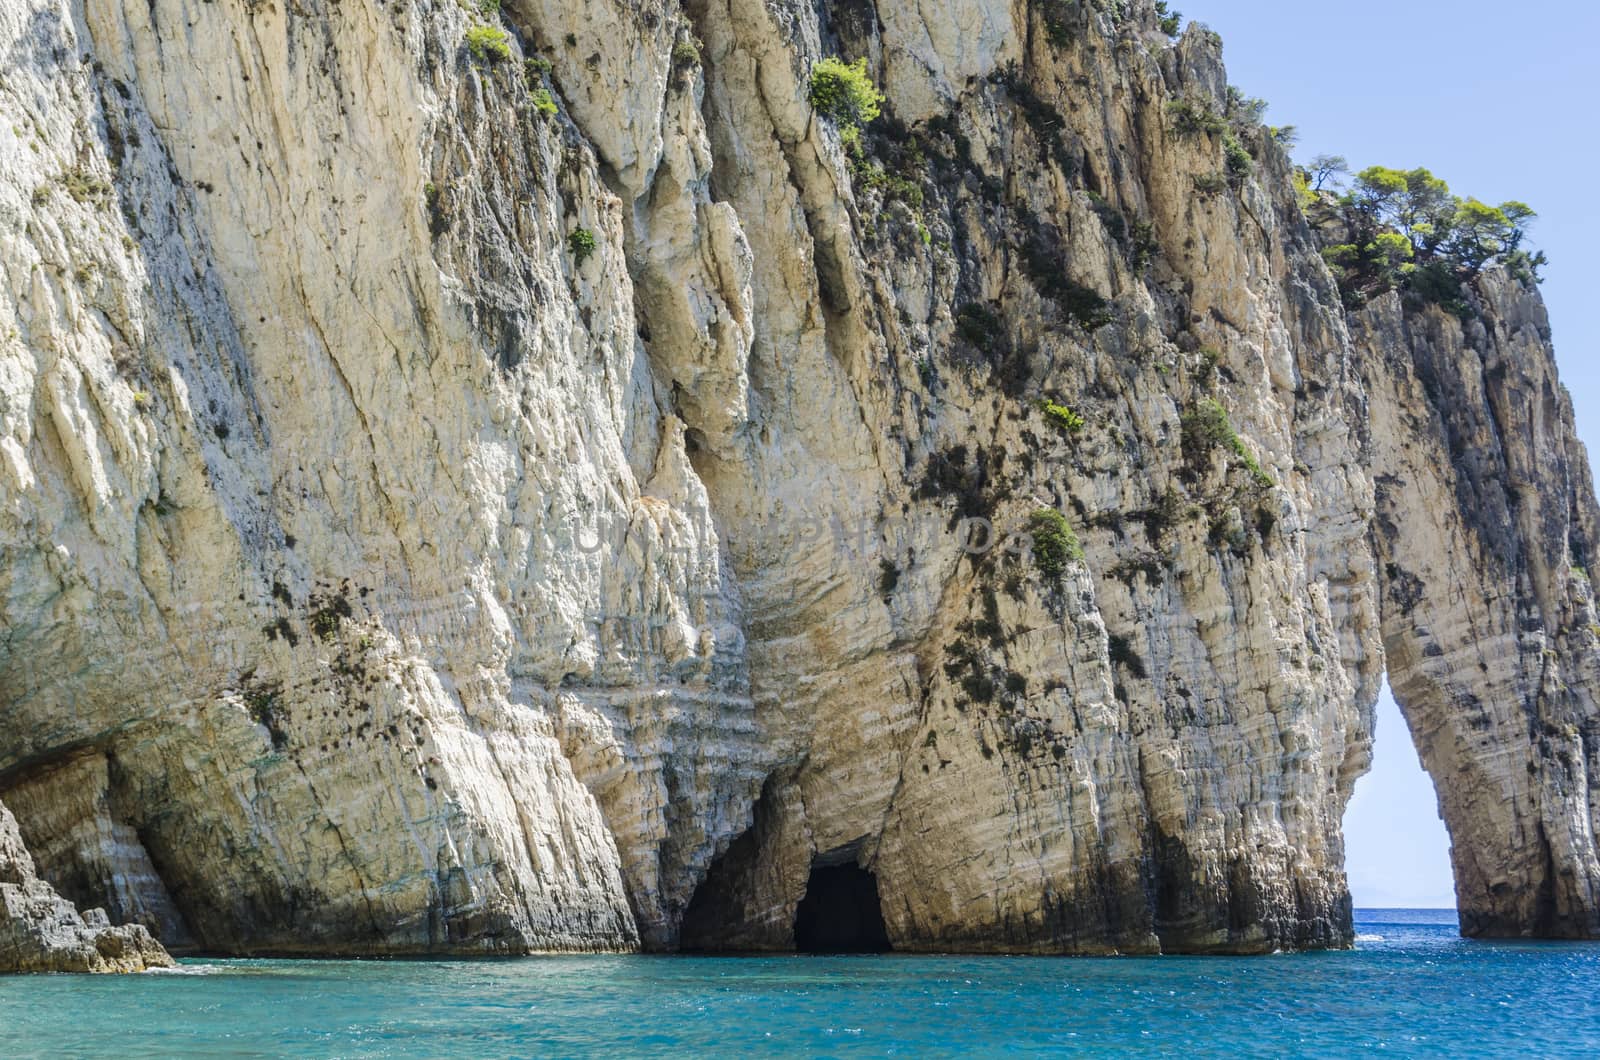 reefs caves and openings pierced by the clear waters of the Ionian sea on the coast of the island of zakynthos